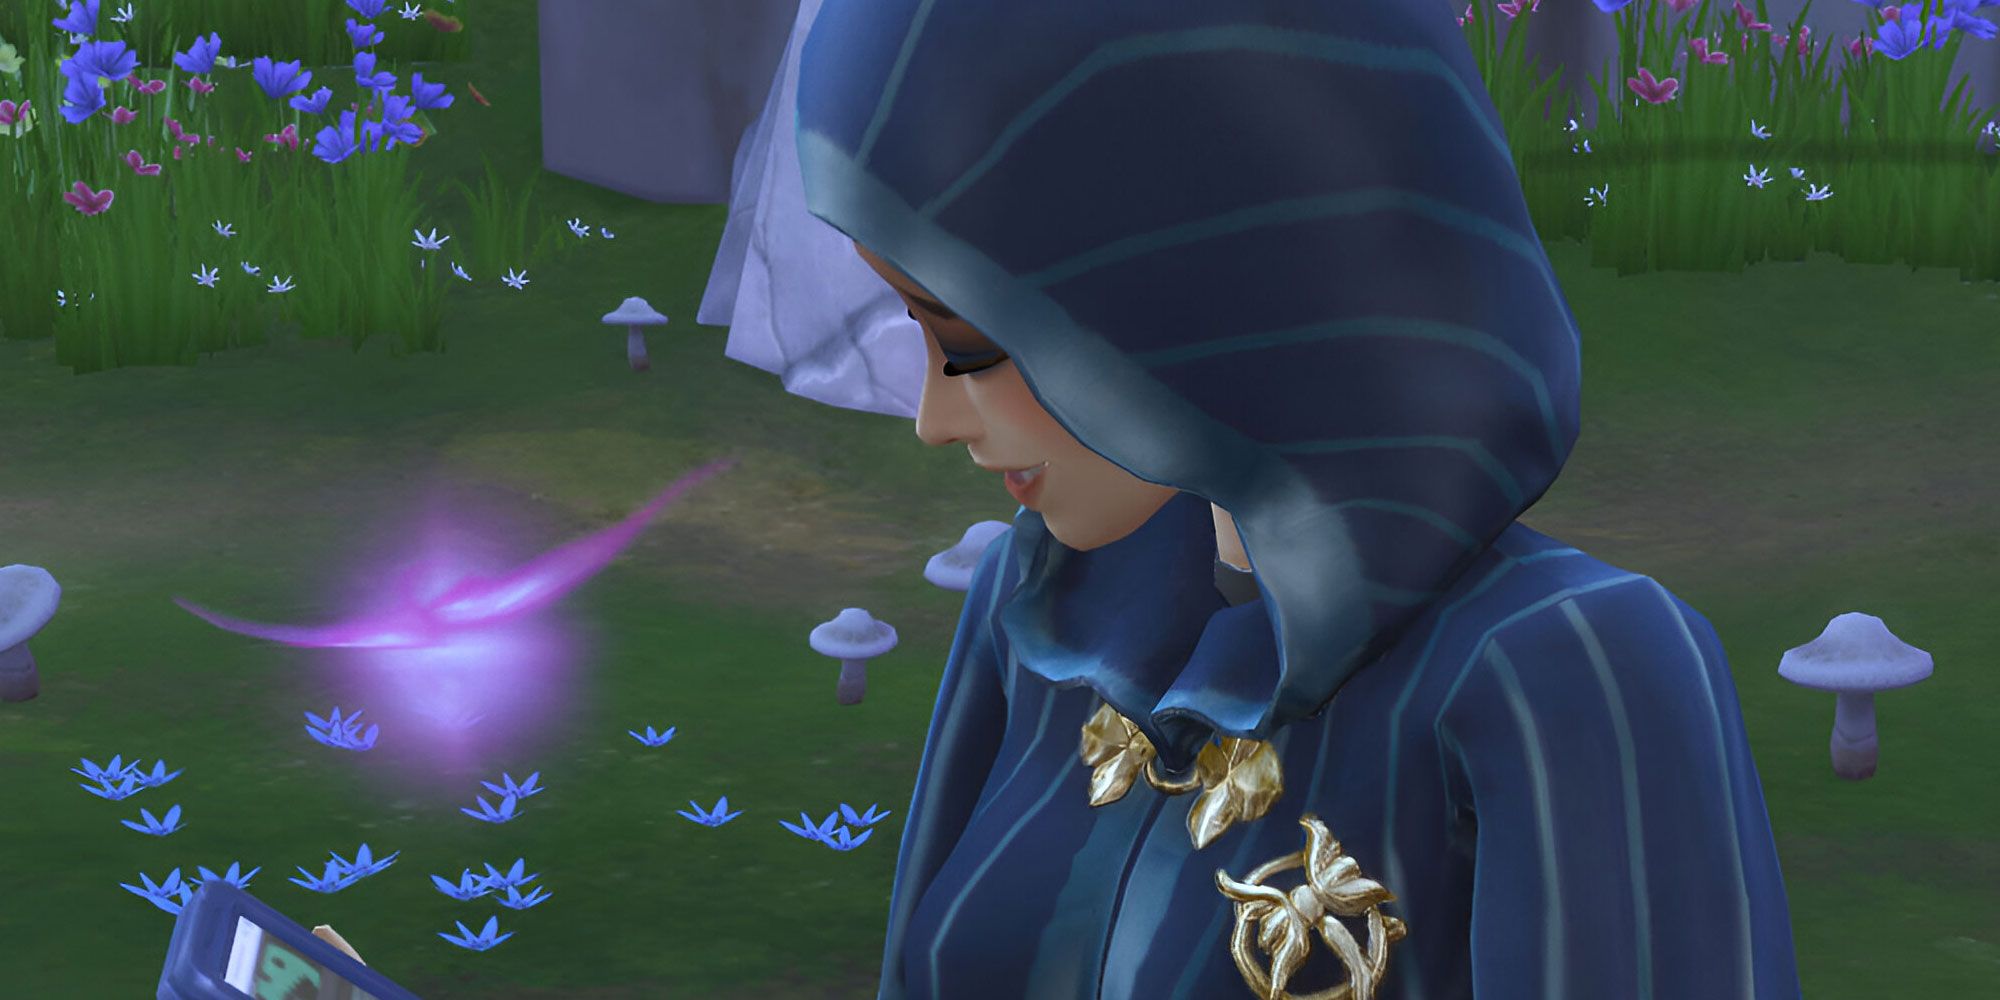 A Sim wearing Secret Society robes uses her phone while a small purple sprite flies around her.